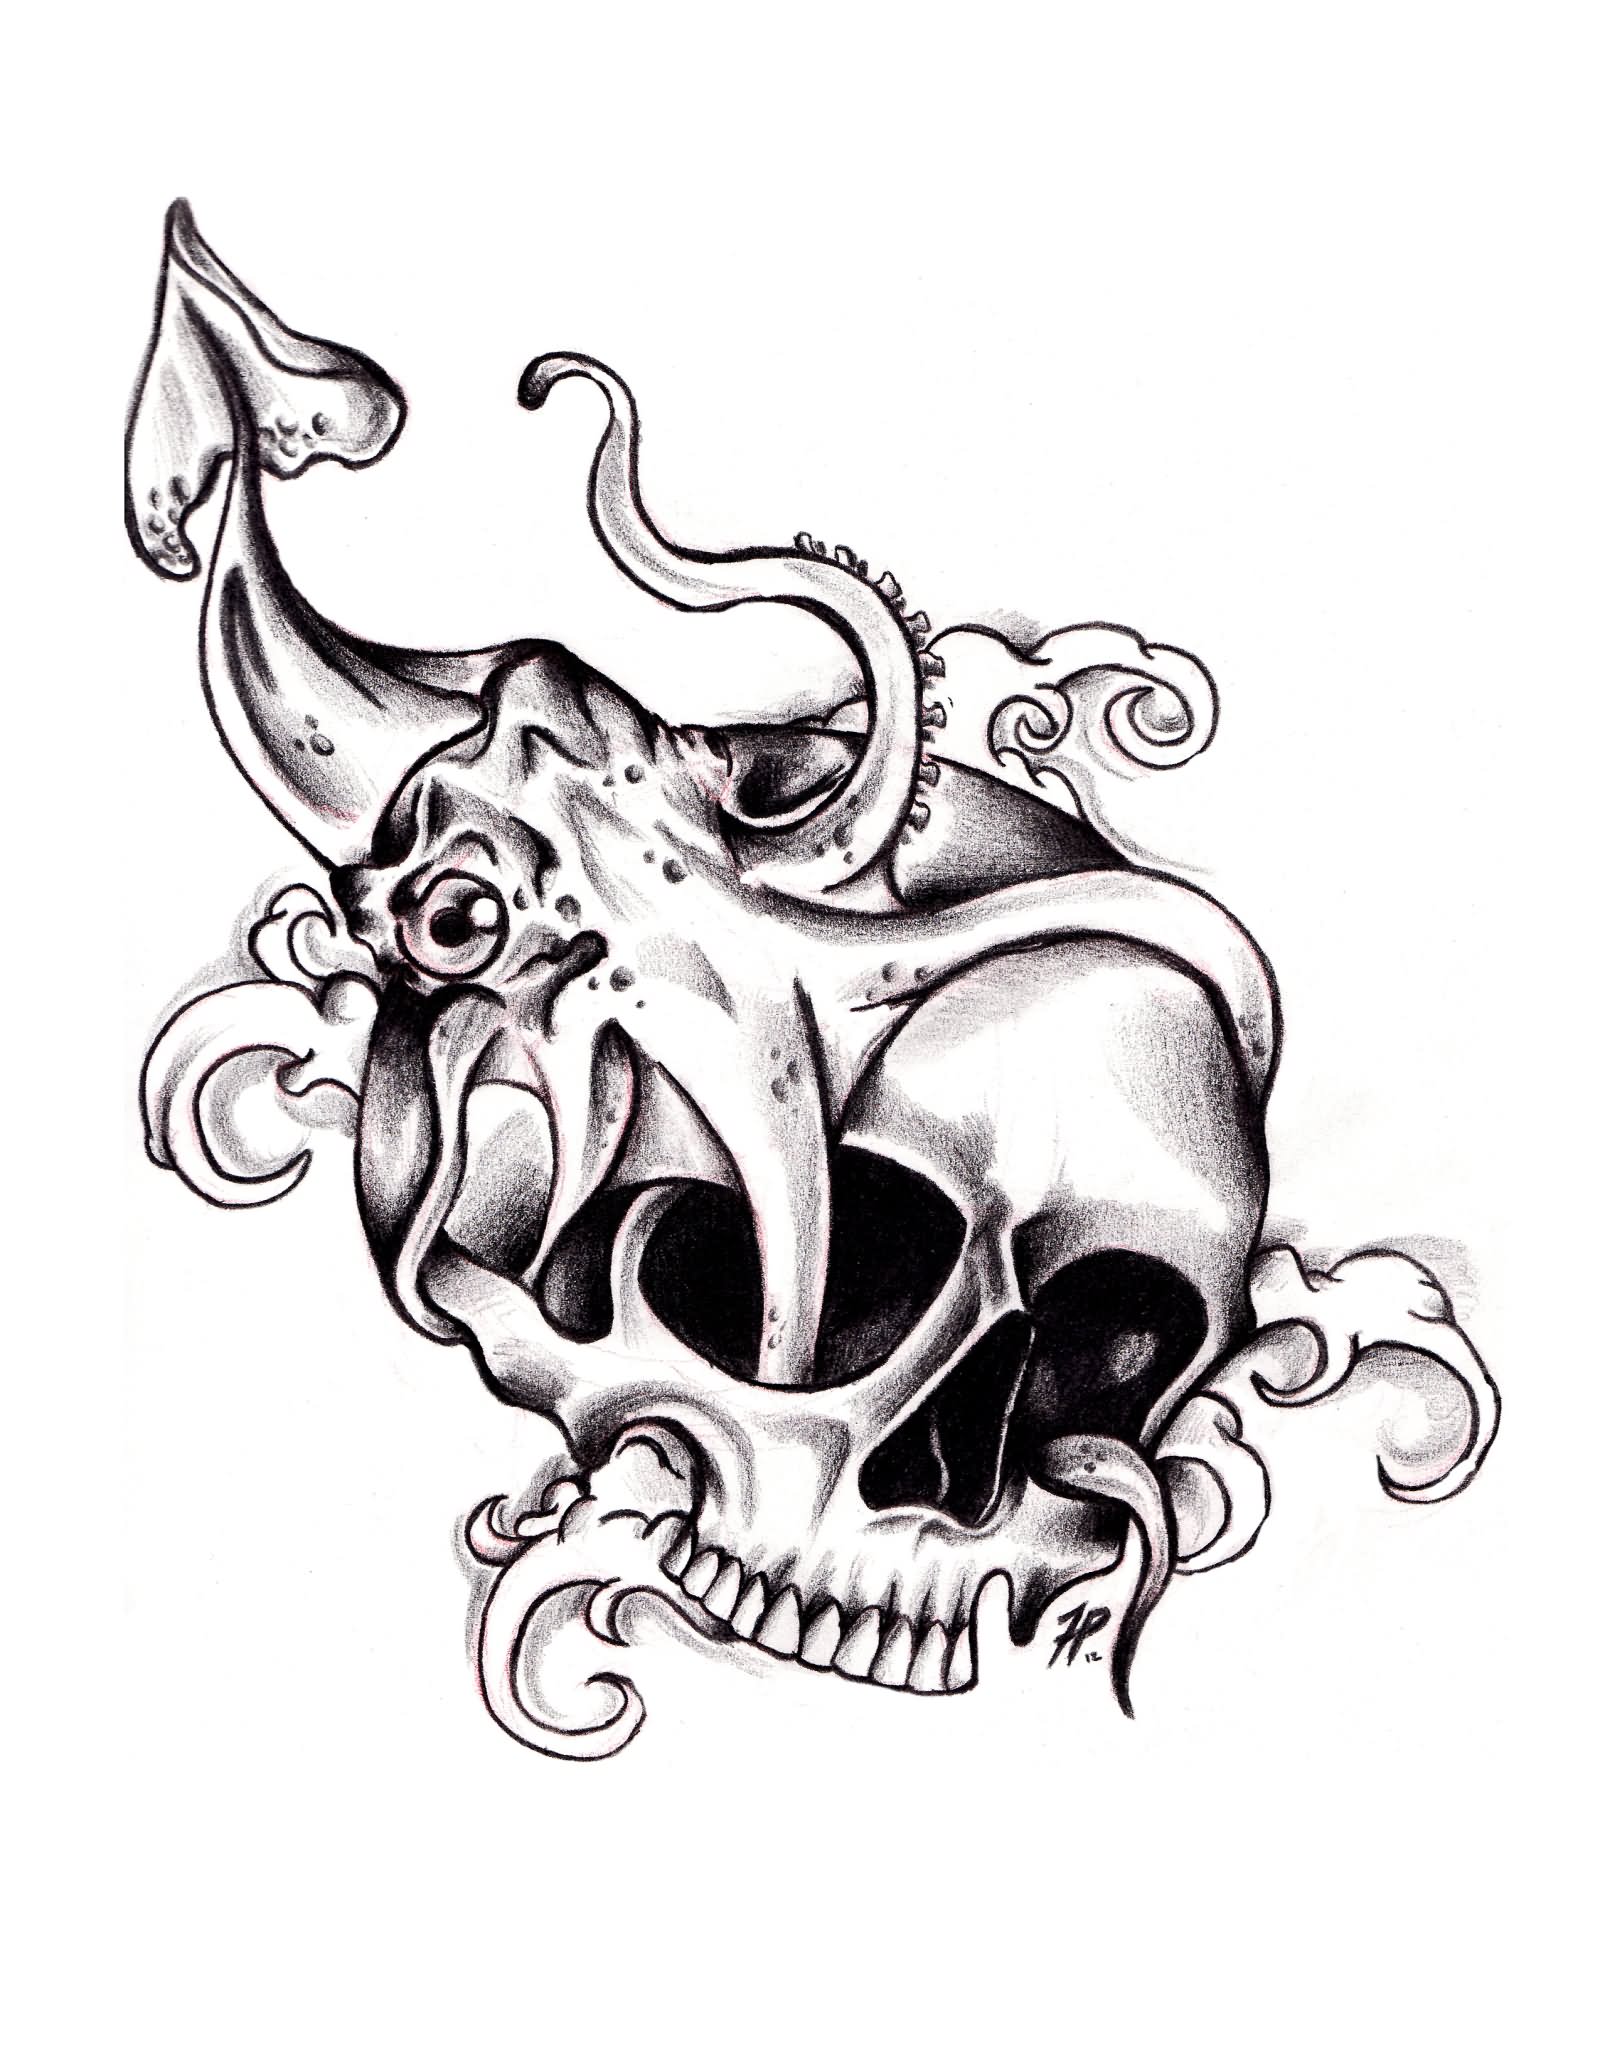 Squid And Skull Black And White Tattoo Design